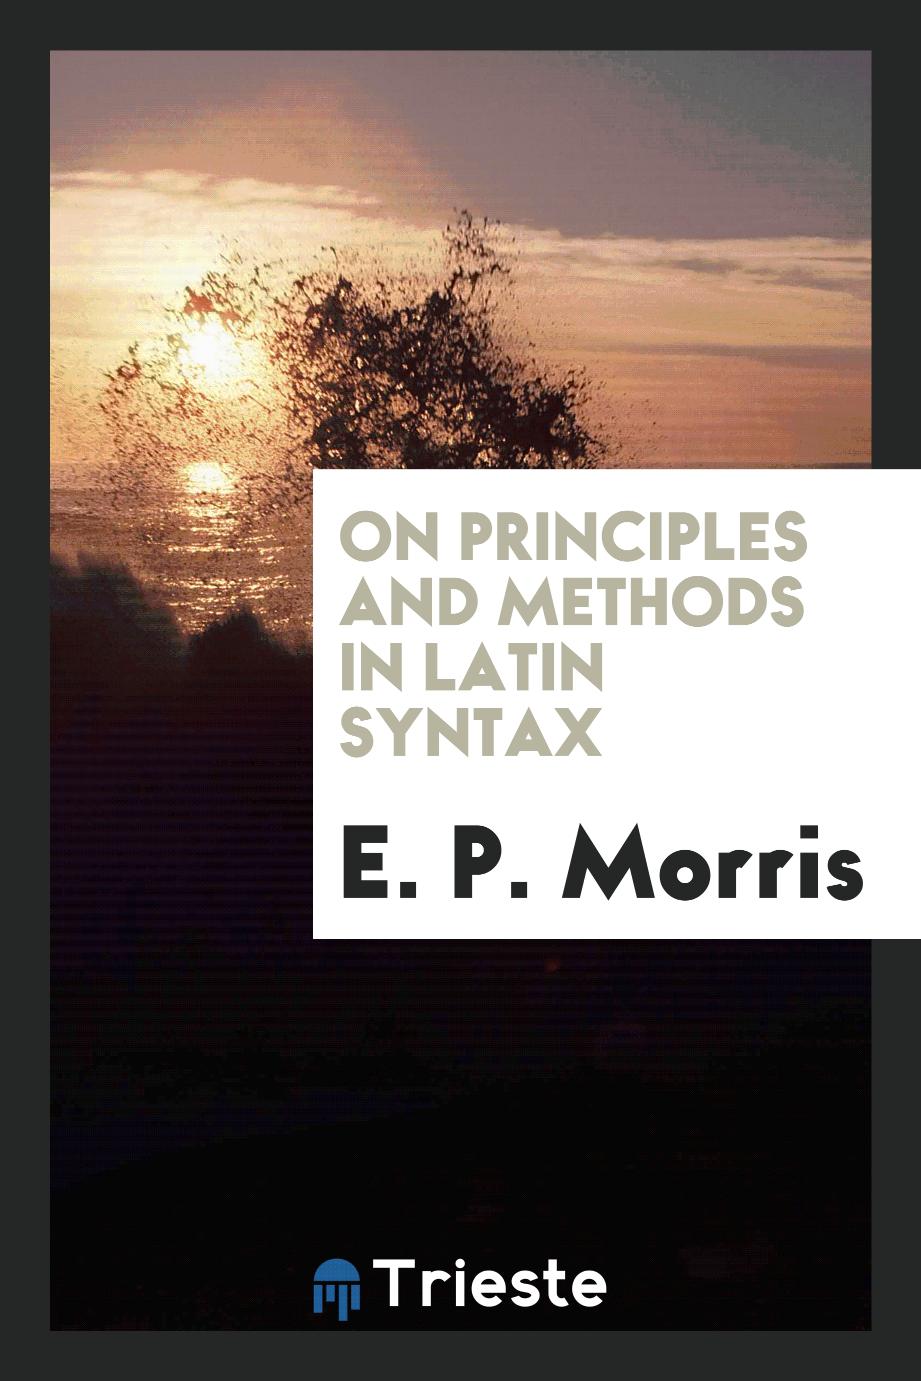 On principles and methods in Latin syntax